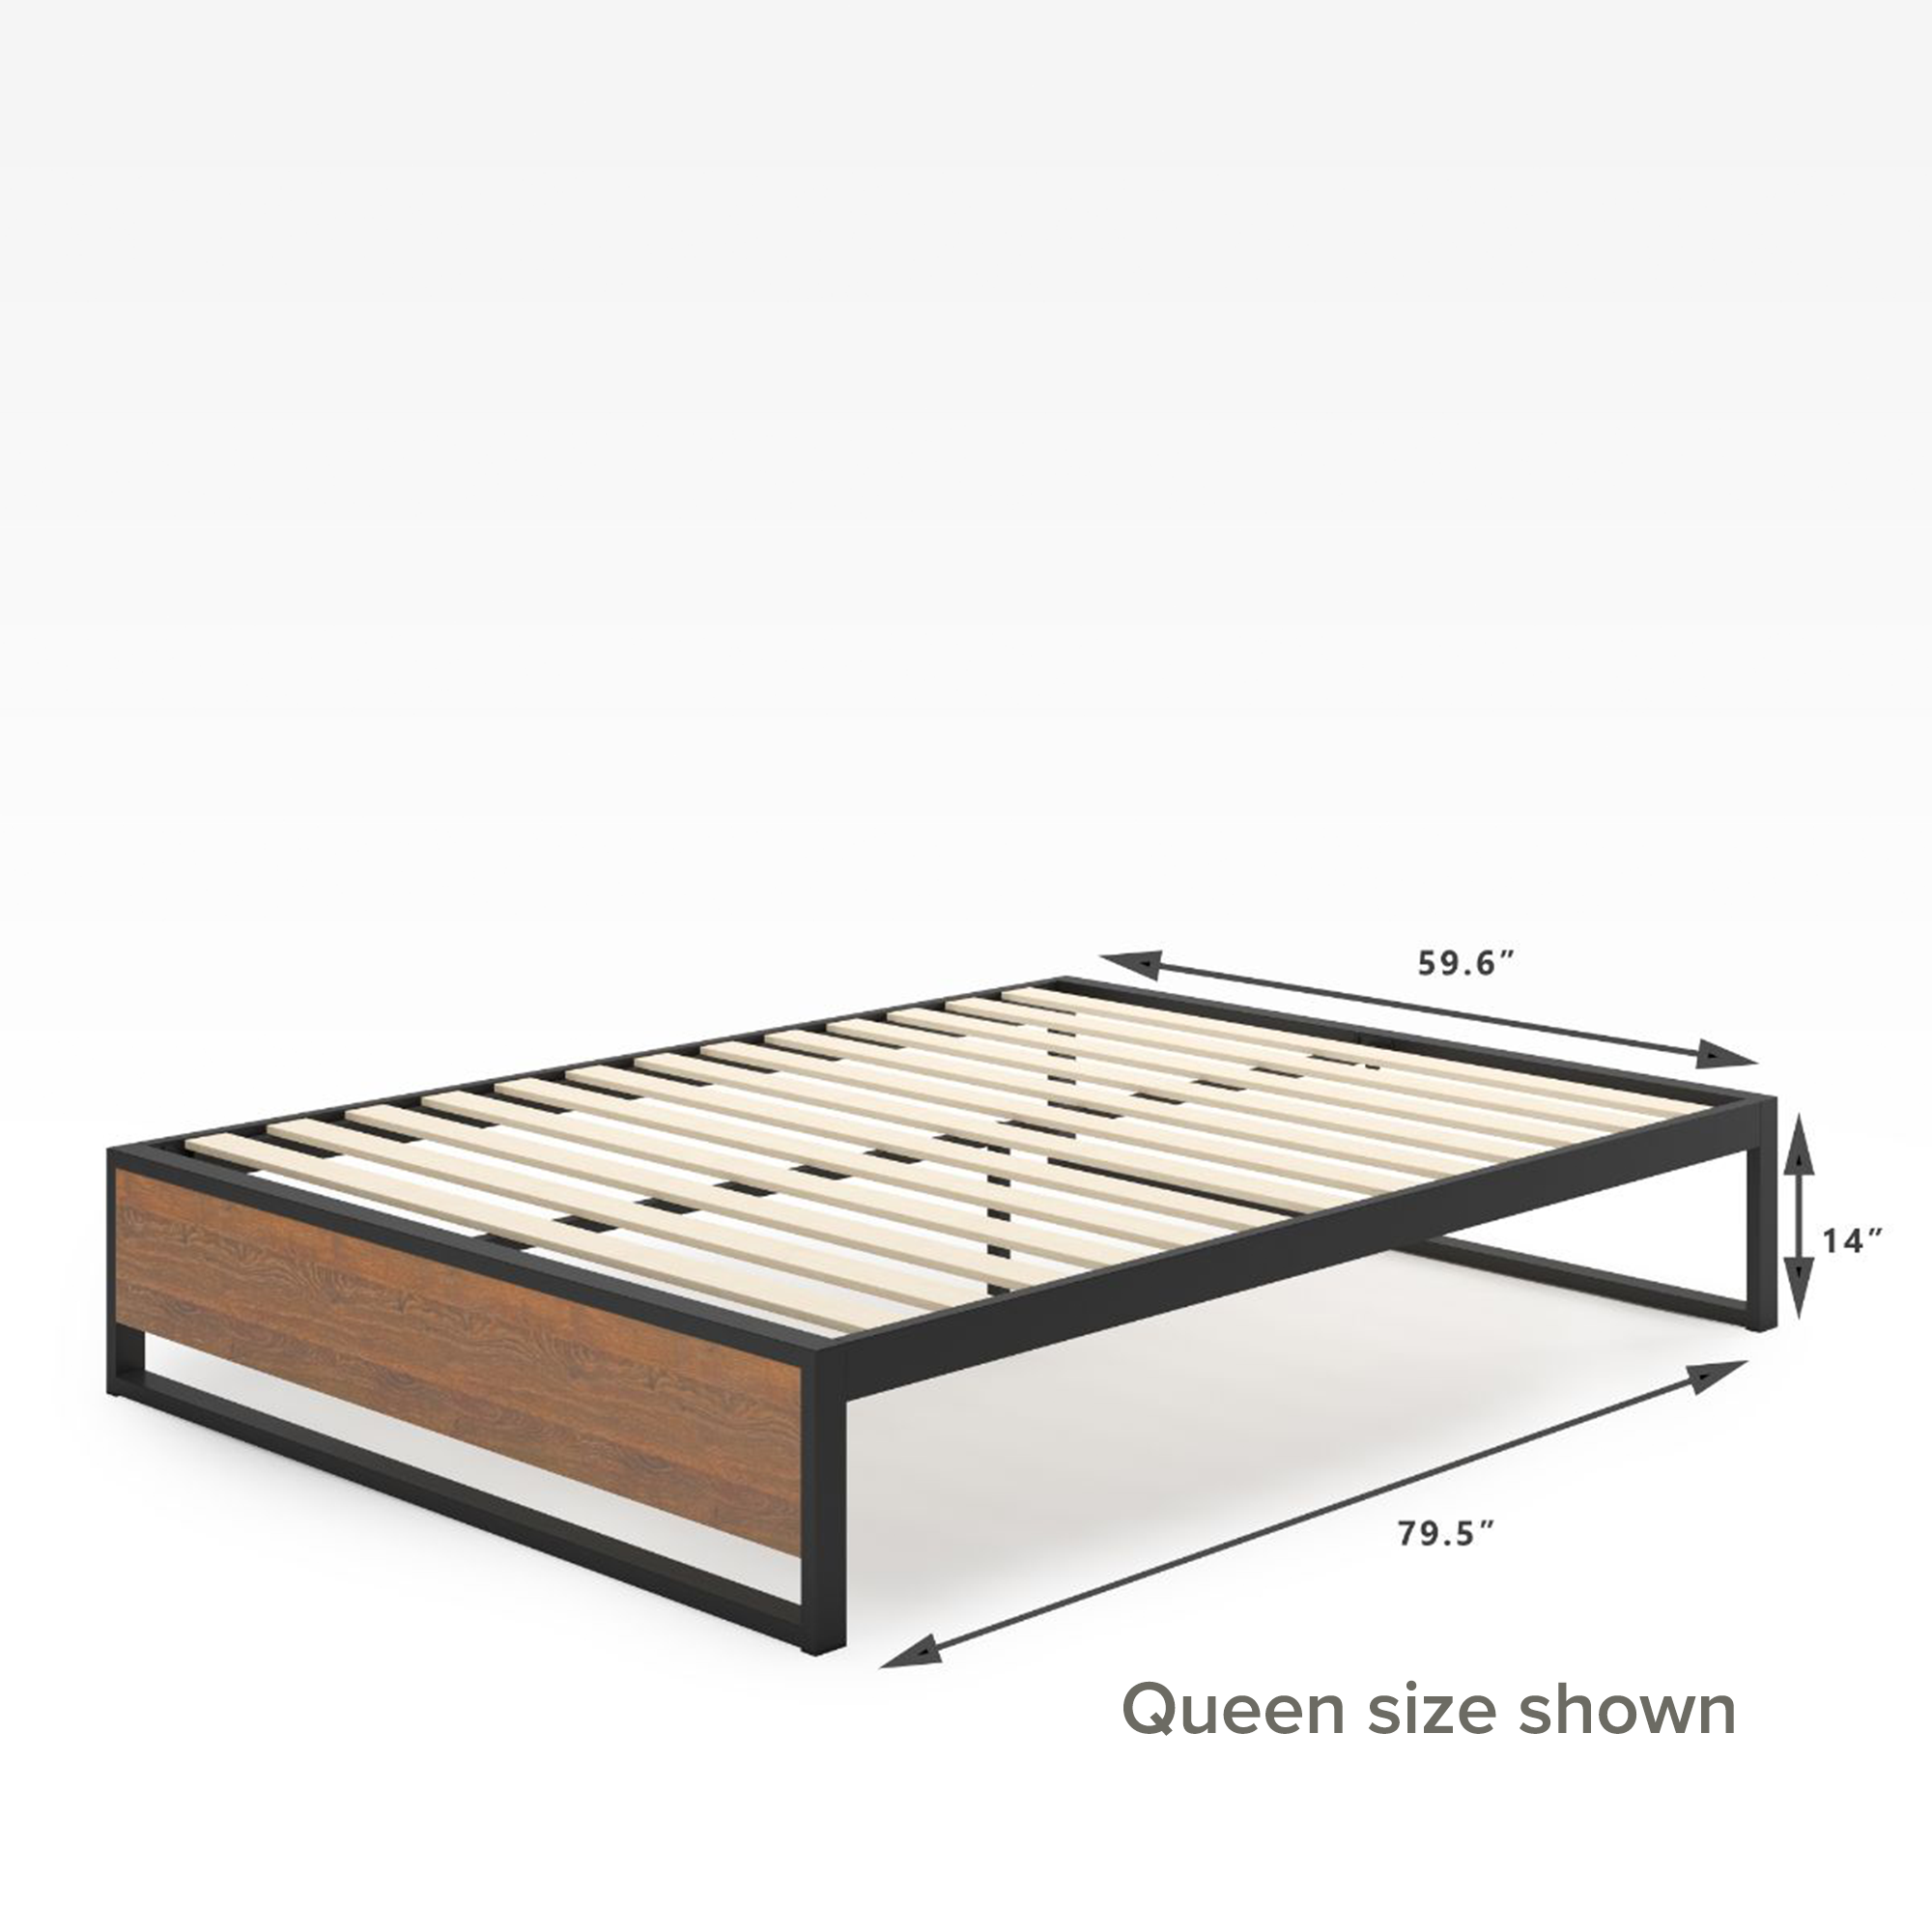 2019 GOOD DESIGN™ Award Winner - Suzanne Metal and Wood Platforma Bed Frame 14inch Queen Size Dimensions 